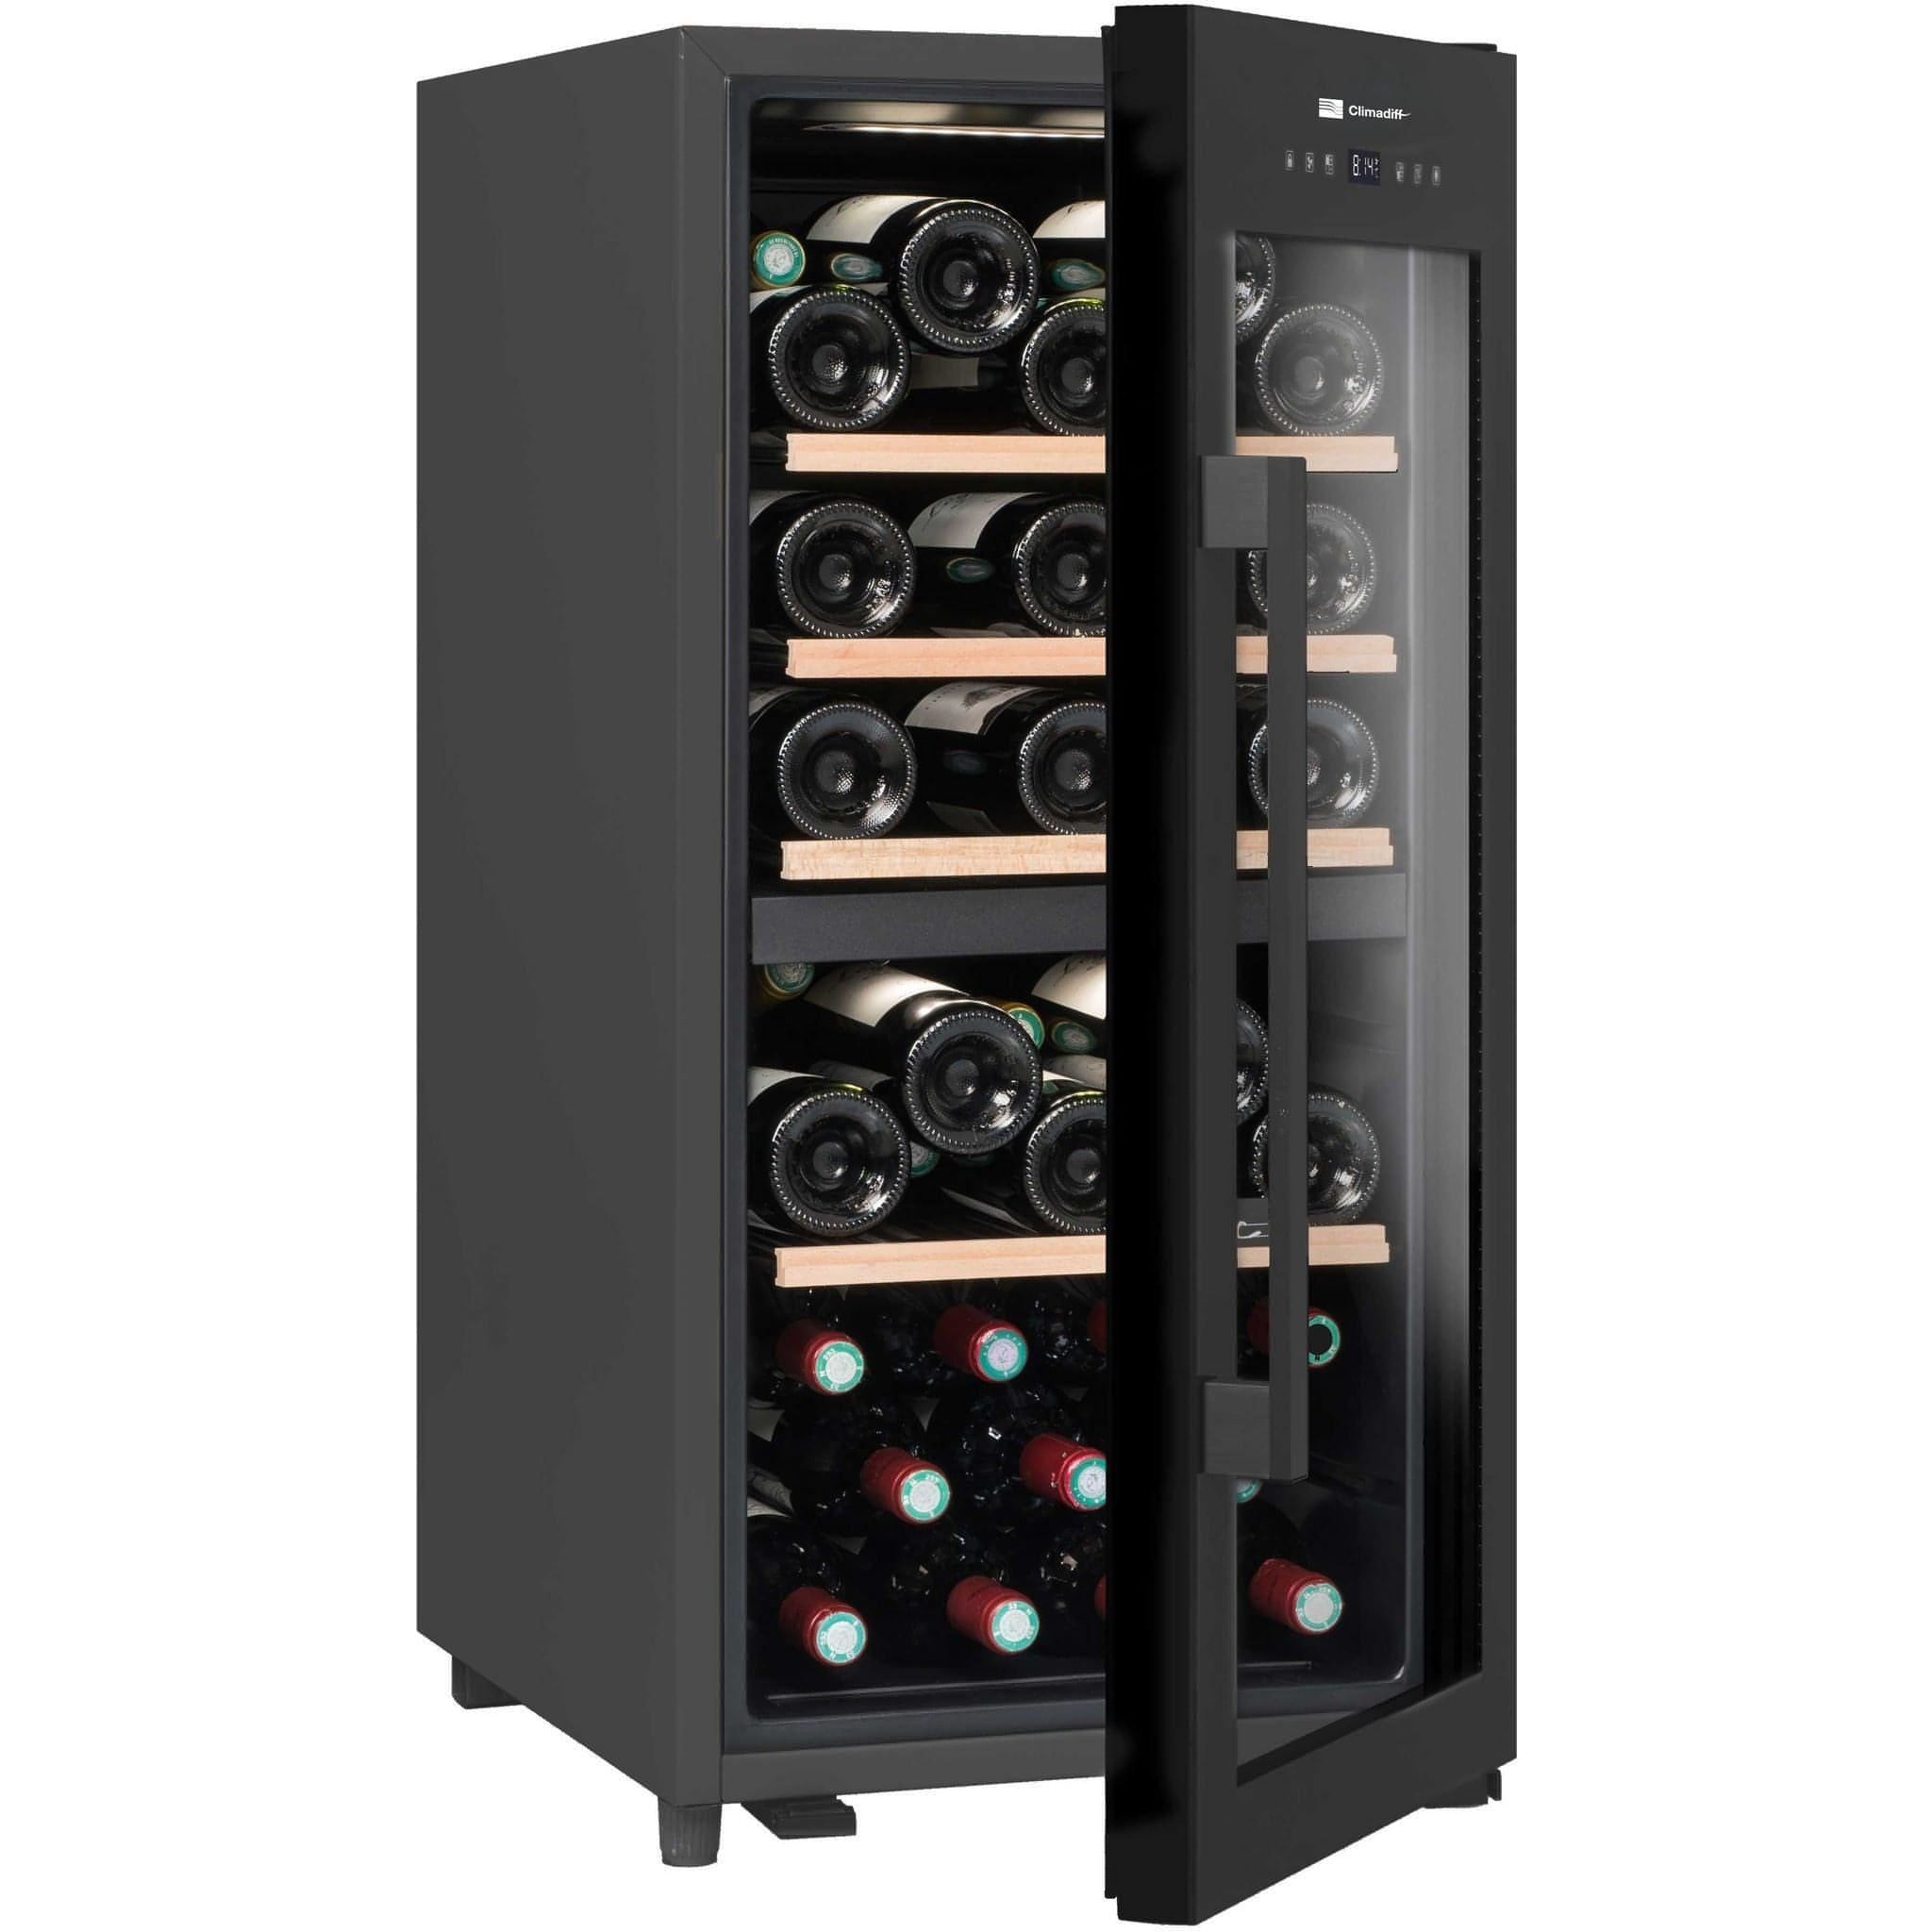 Climadiff - Dual Zone - 41 Bottle - Freestanding Wine Cooler CLD40B1